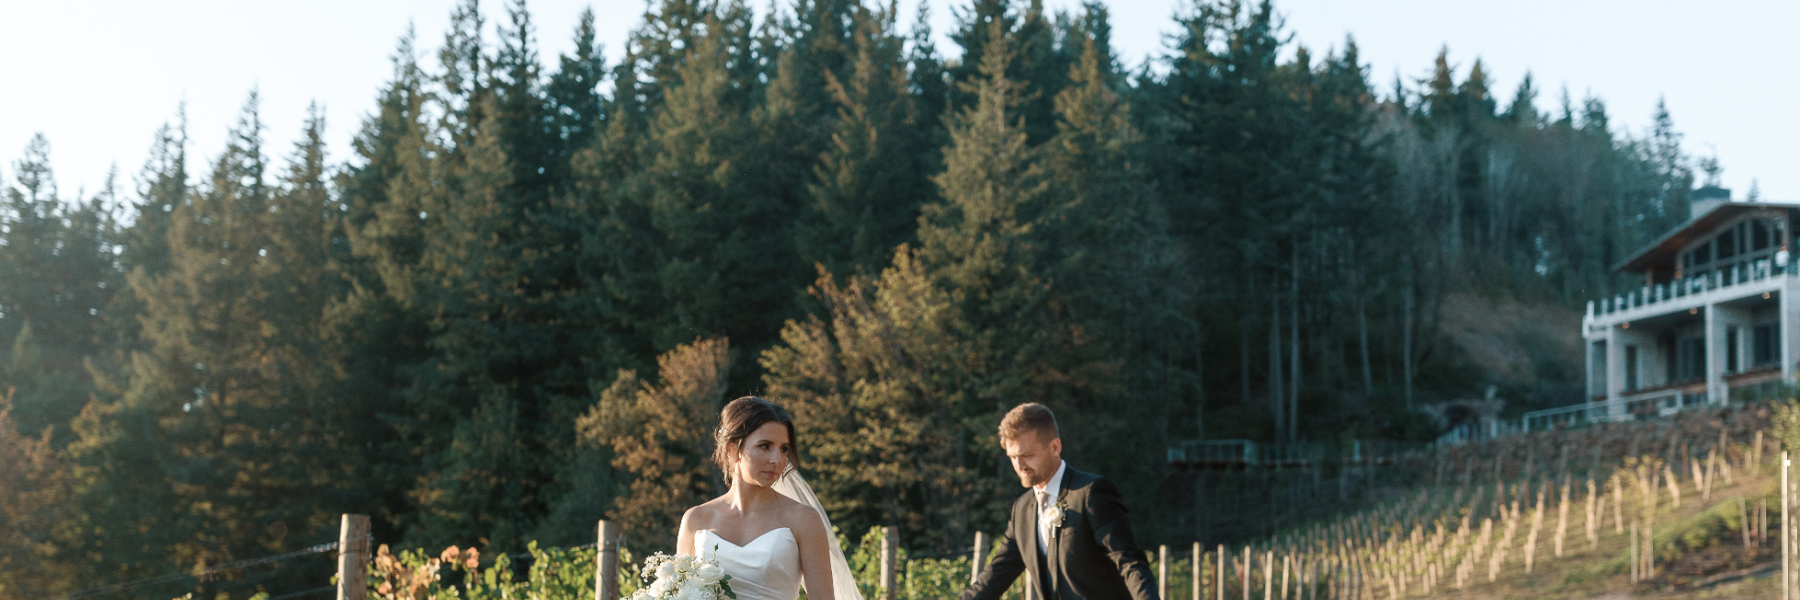 bride and groom at winery wedding in Oregon